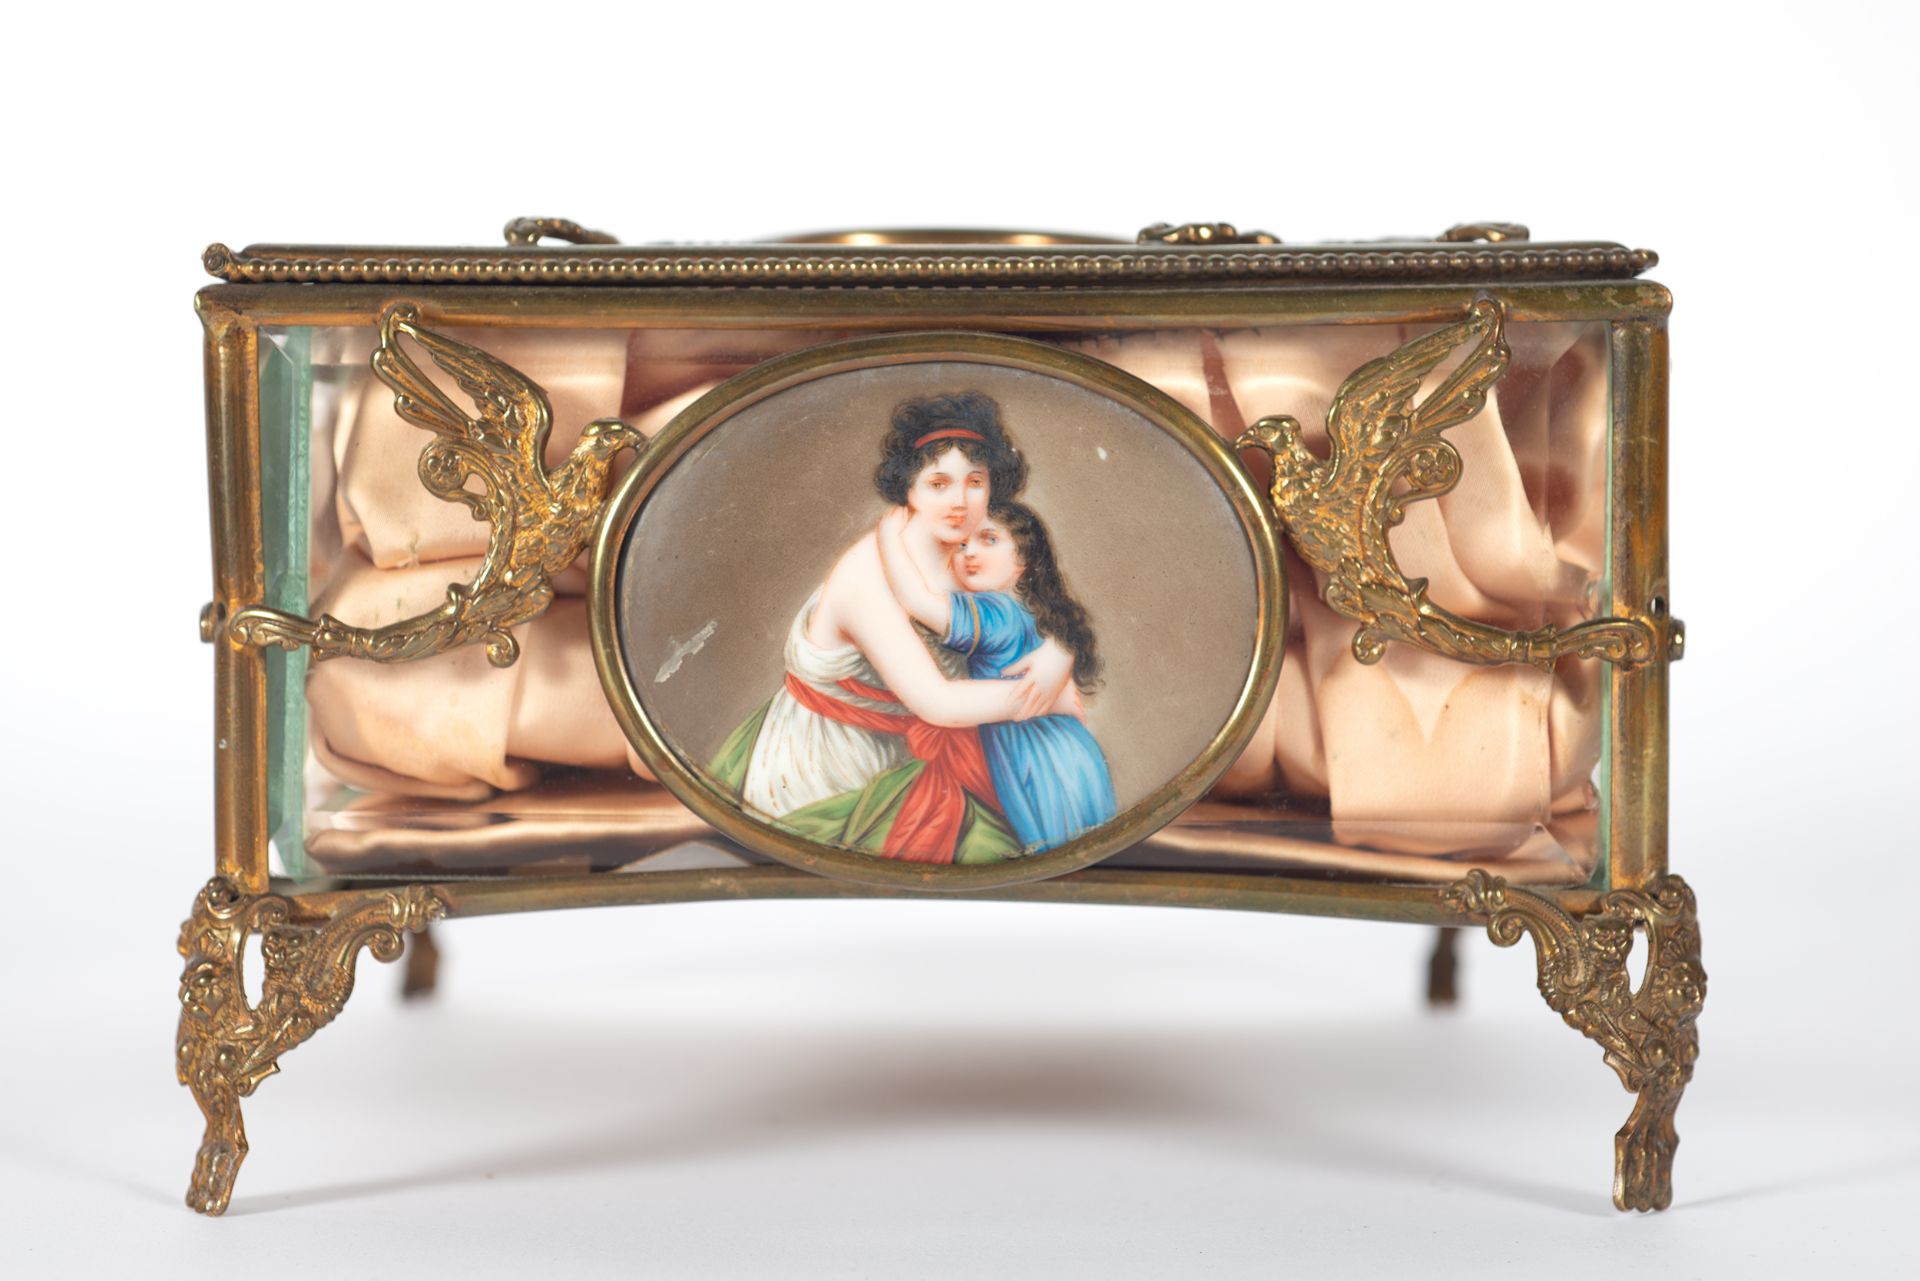 French bronze and enamel jewelry box, 19th century - Image 6 of 7